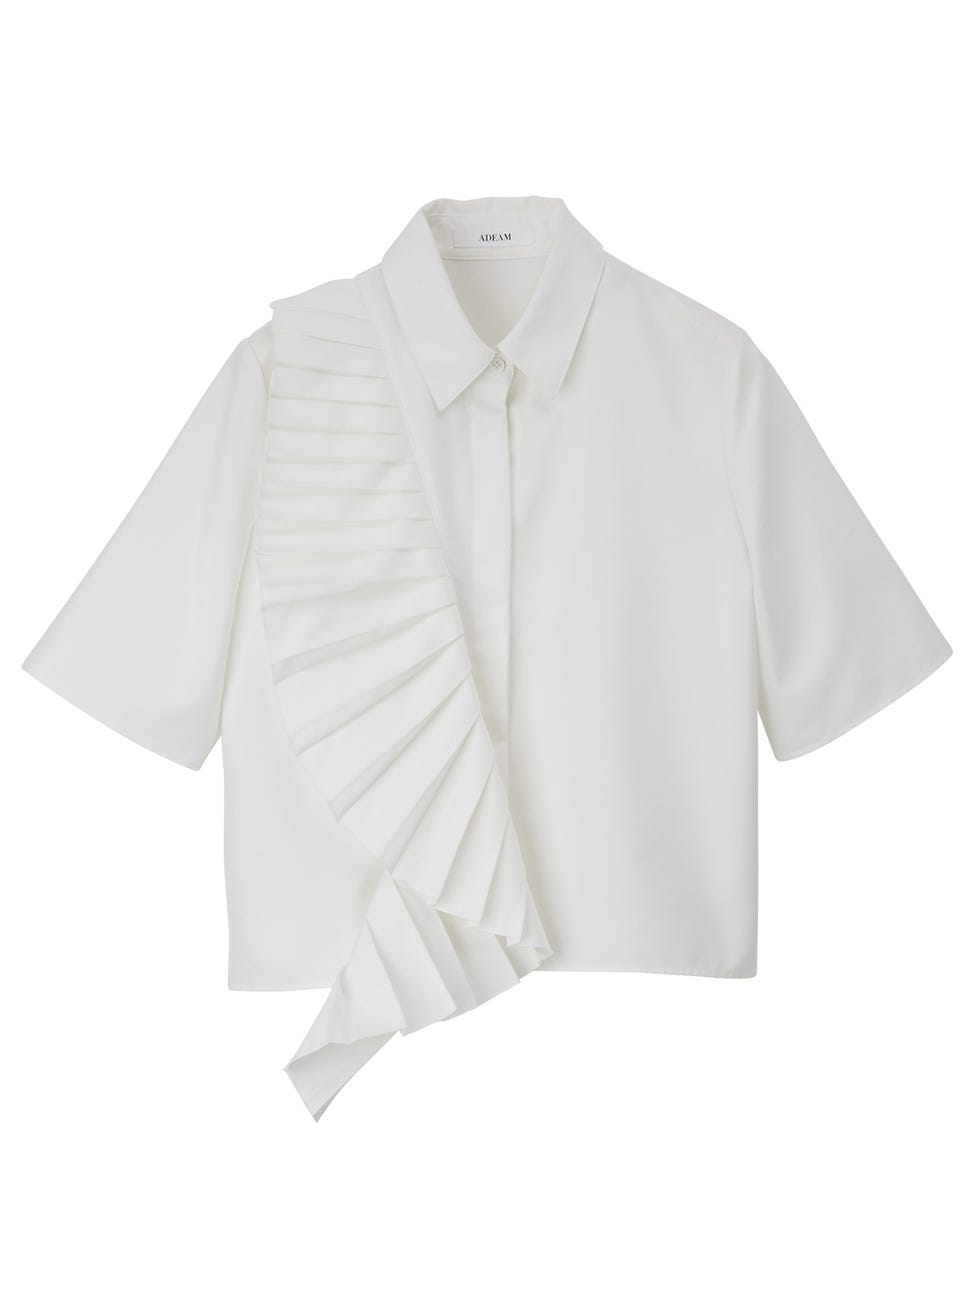 White, Clothing, Collar, Sleeve, Shirt, Outerwear, Blouse, Button, Top, Formal wear, 